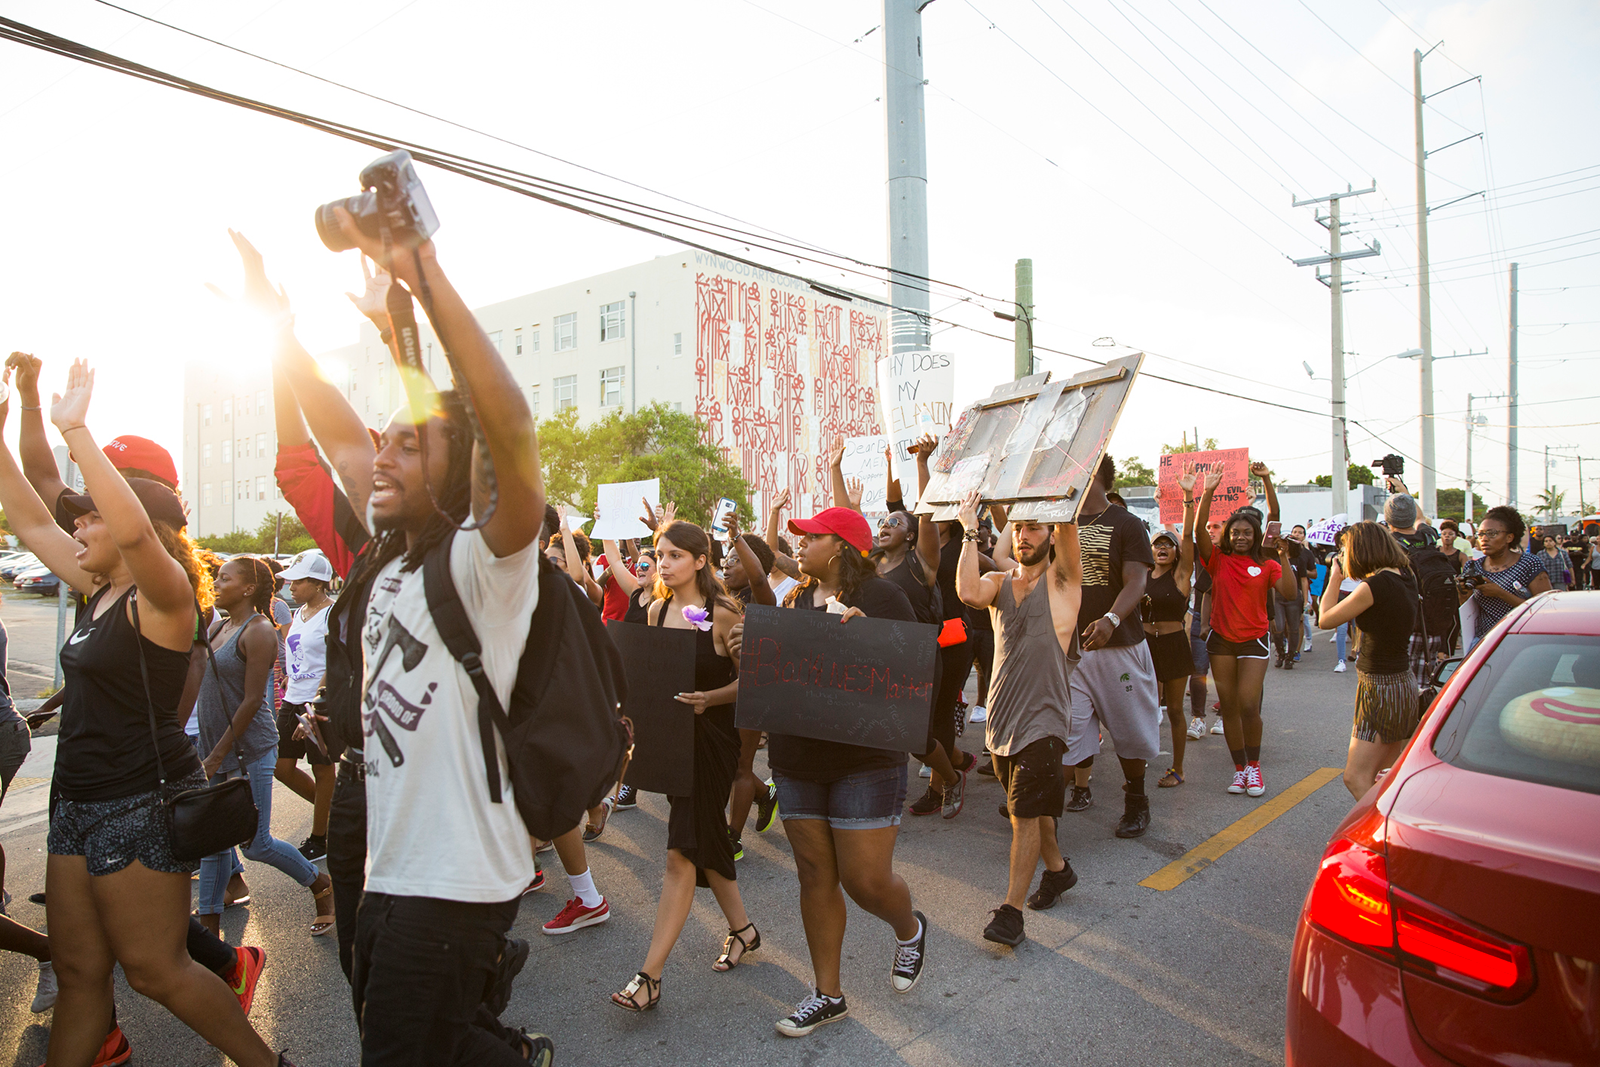 A racially diverse group of young people marches on a street carrying signs with fists raised in the air